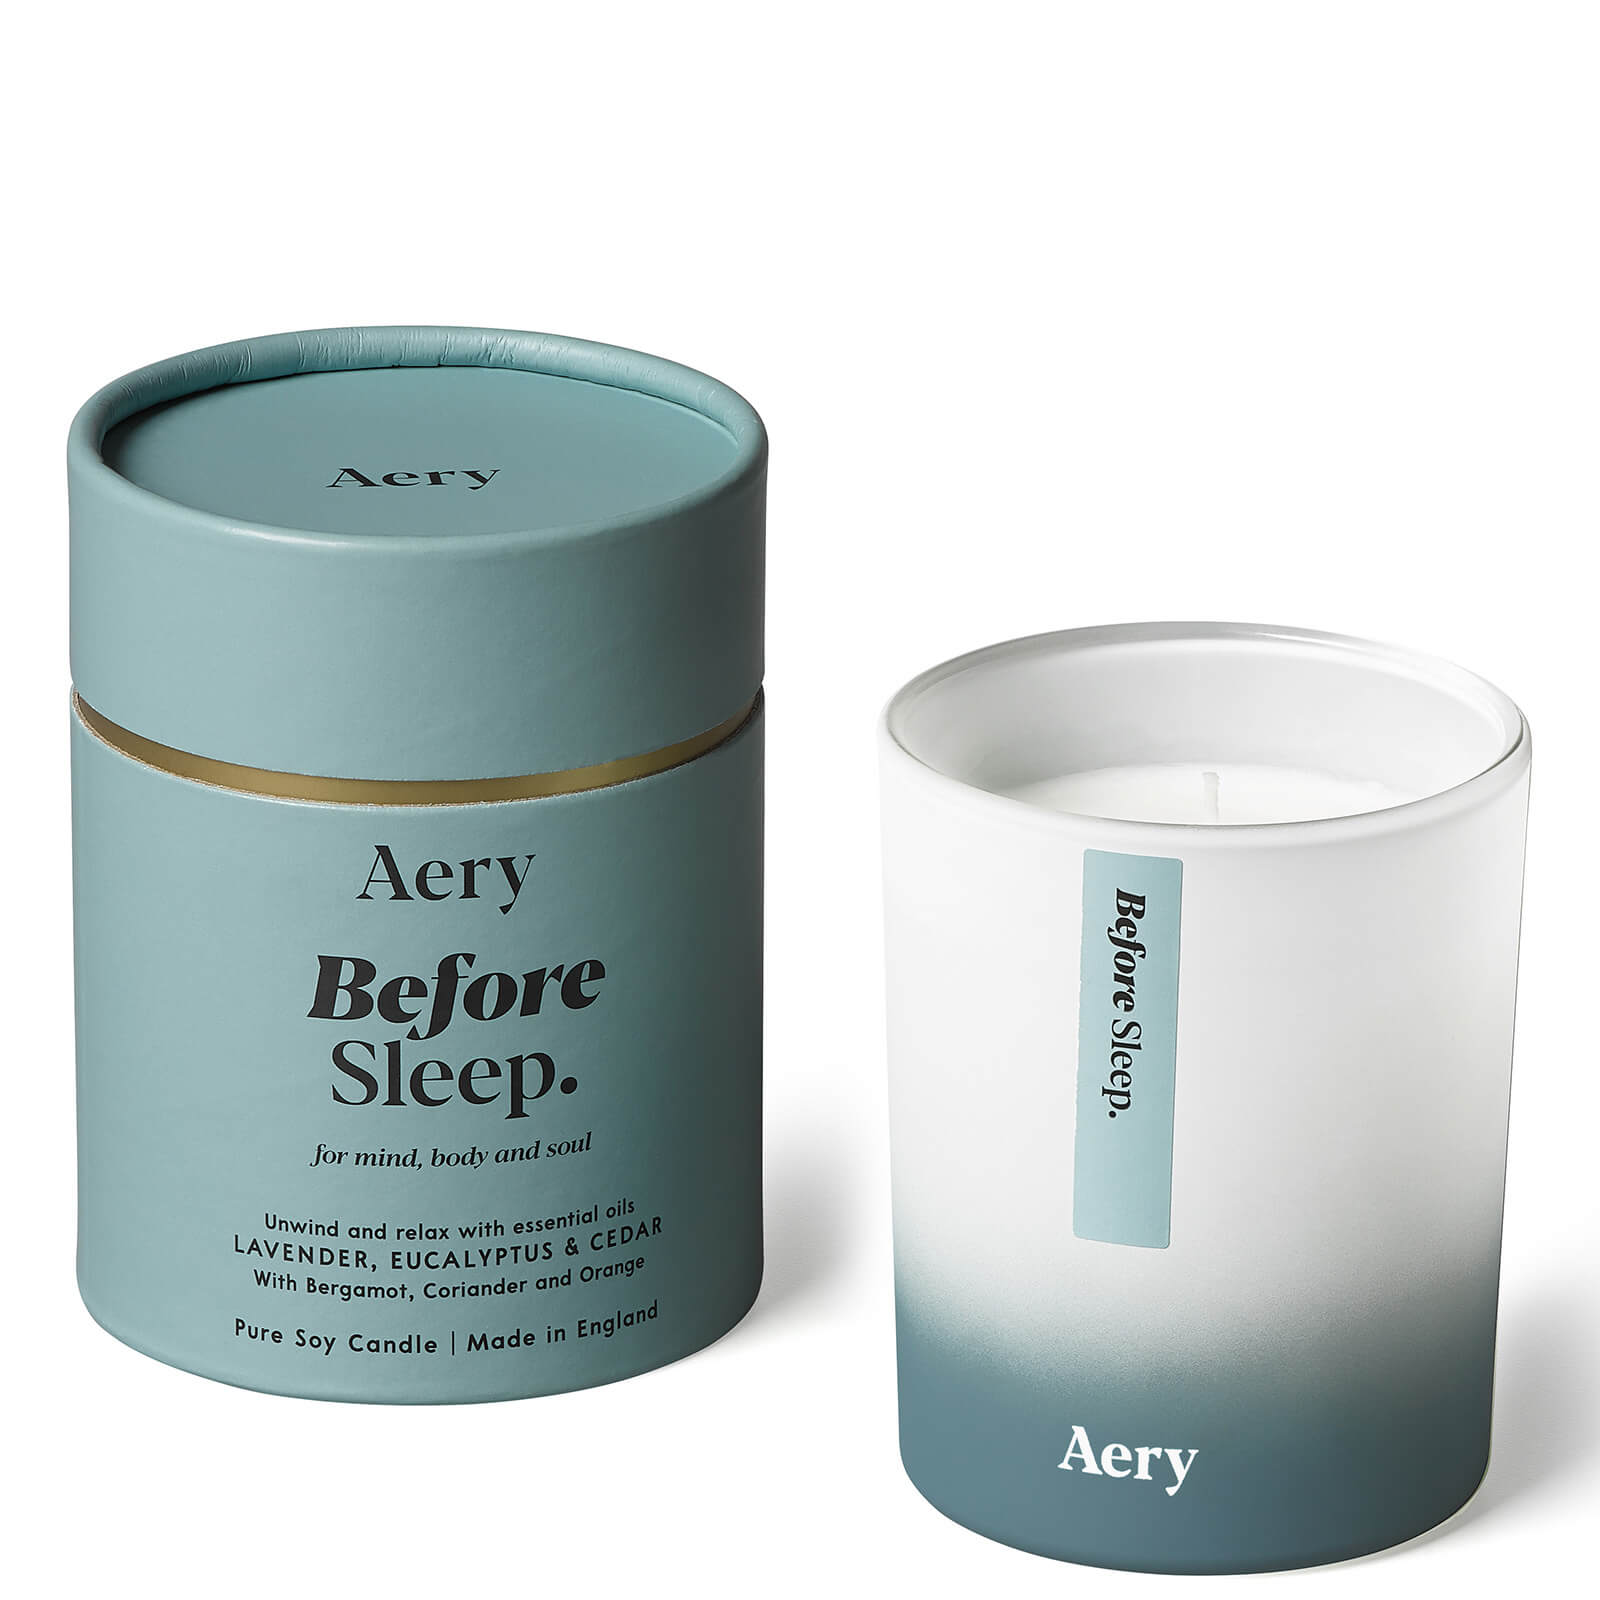 Aery Aromatherapy Candle - Before Sleep In Blue/blue